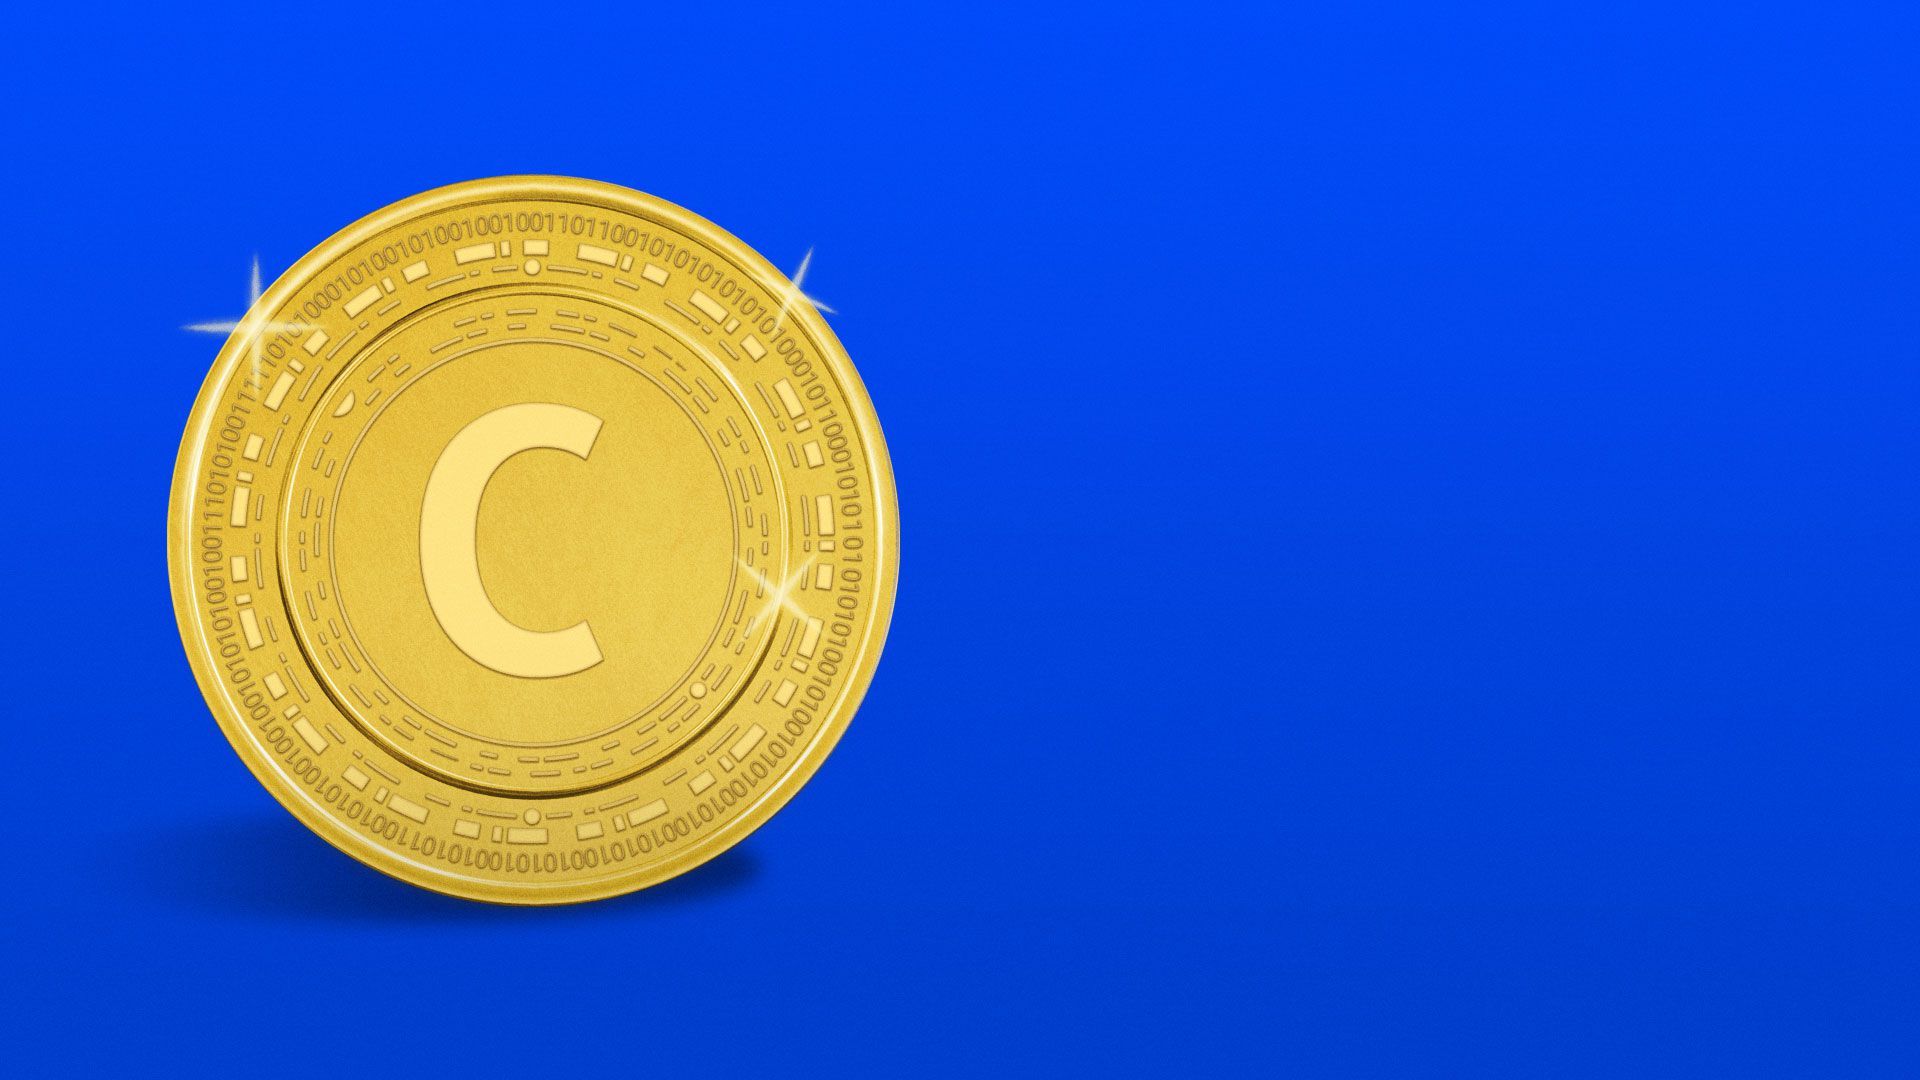 Illustration of a golden glowing cryptocurrency with the Coinbase C